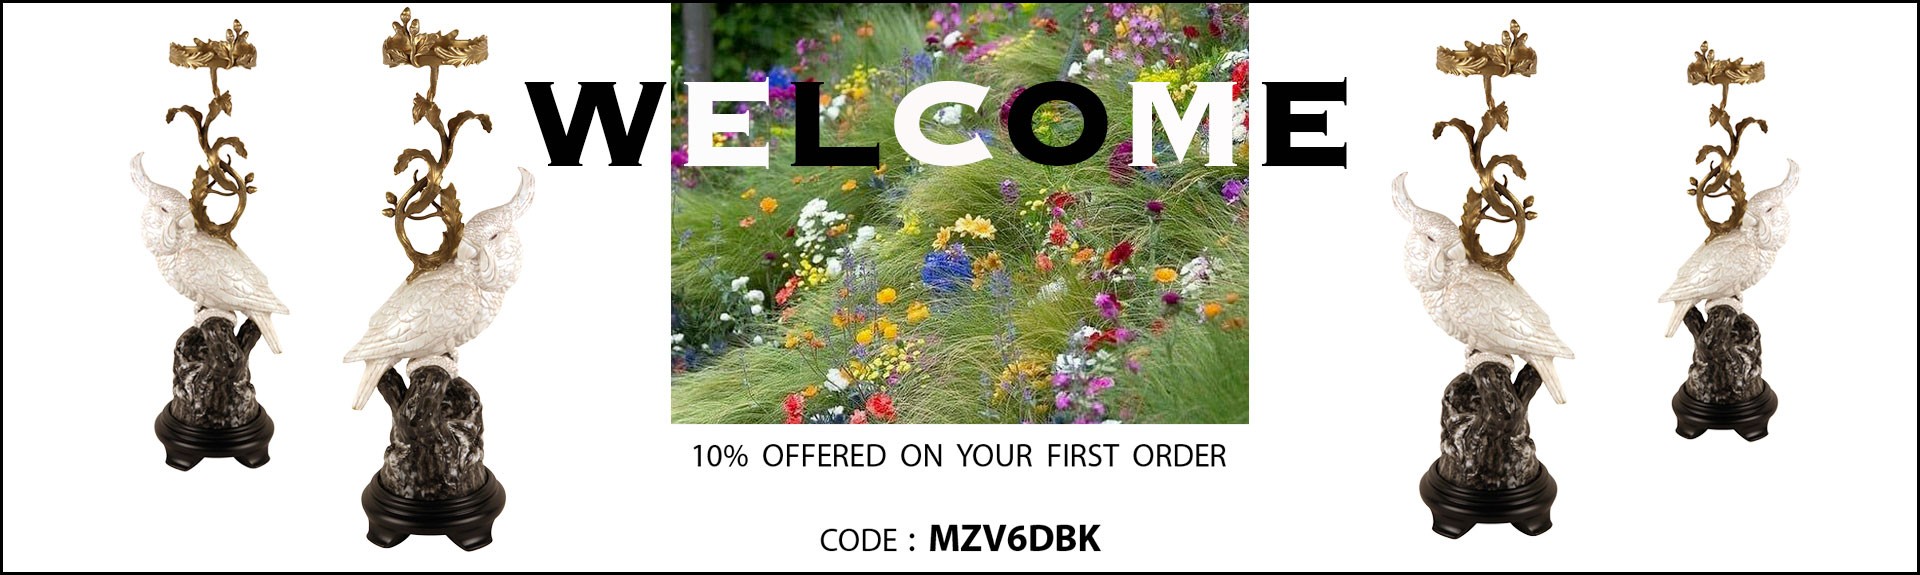 Wellcome Offer